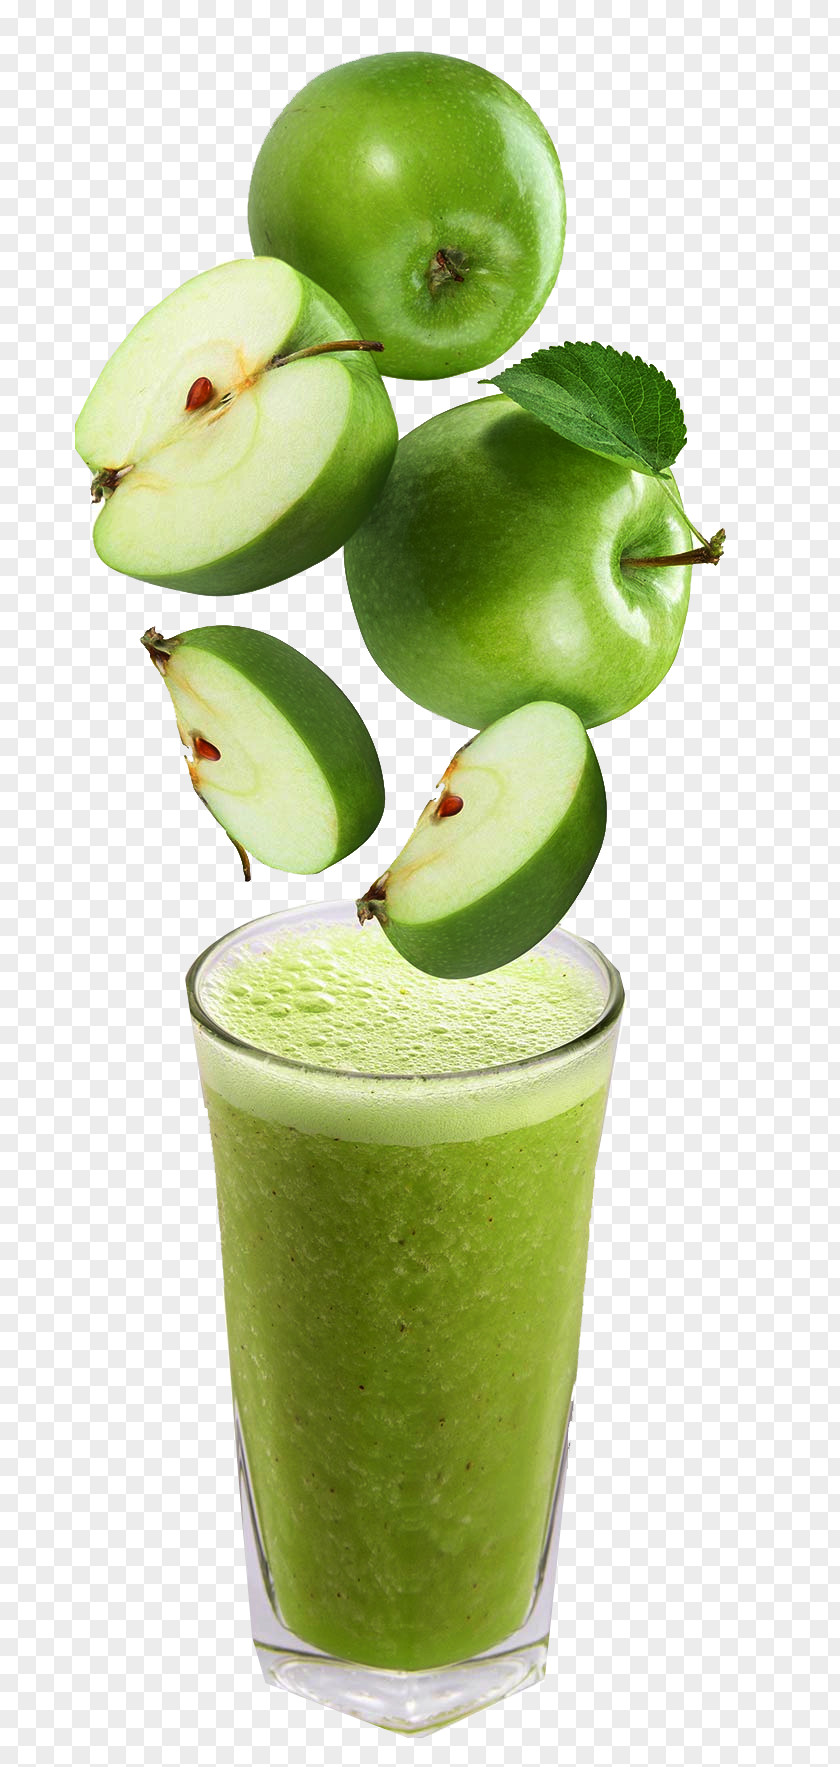 Green Apple Juice Smoothie Cocktail Pie PNG